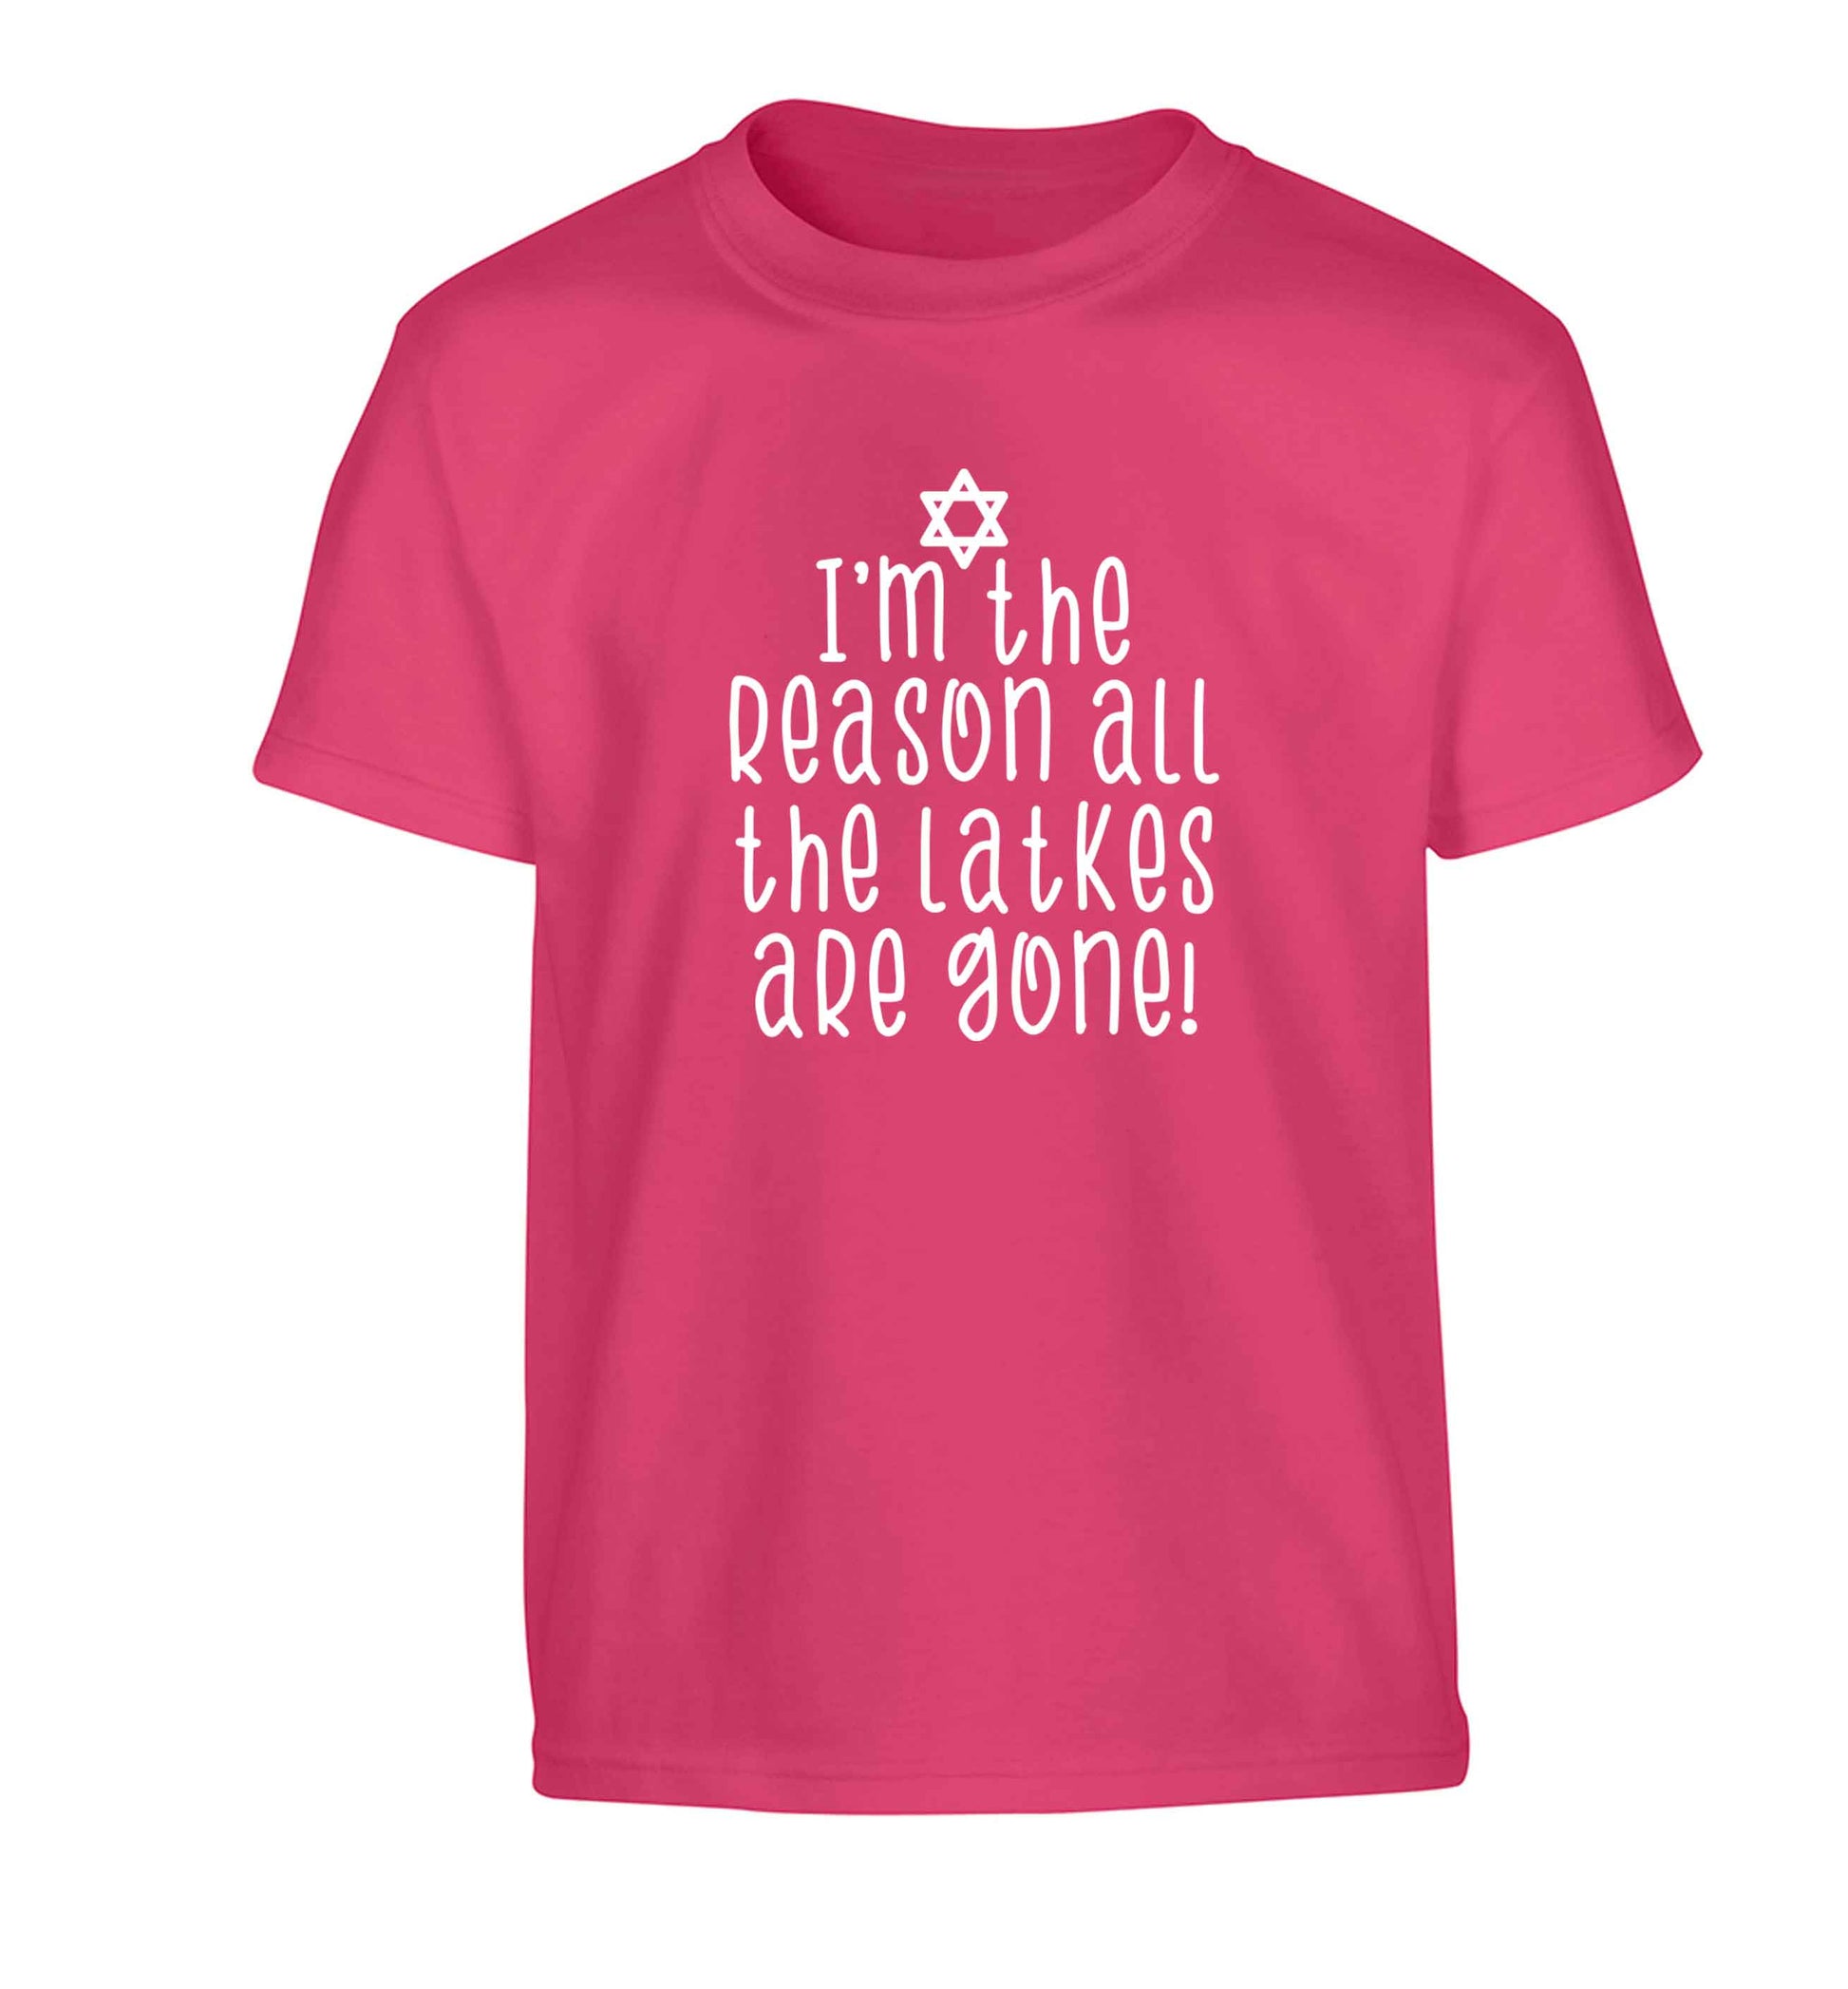 I'm the reason all the latkes are gone Children's pink Tshirt 12-13 Years